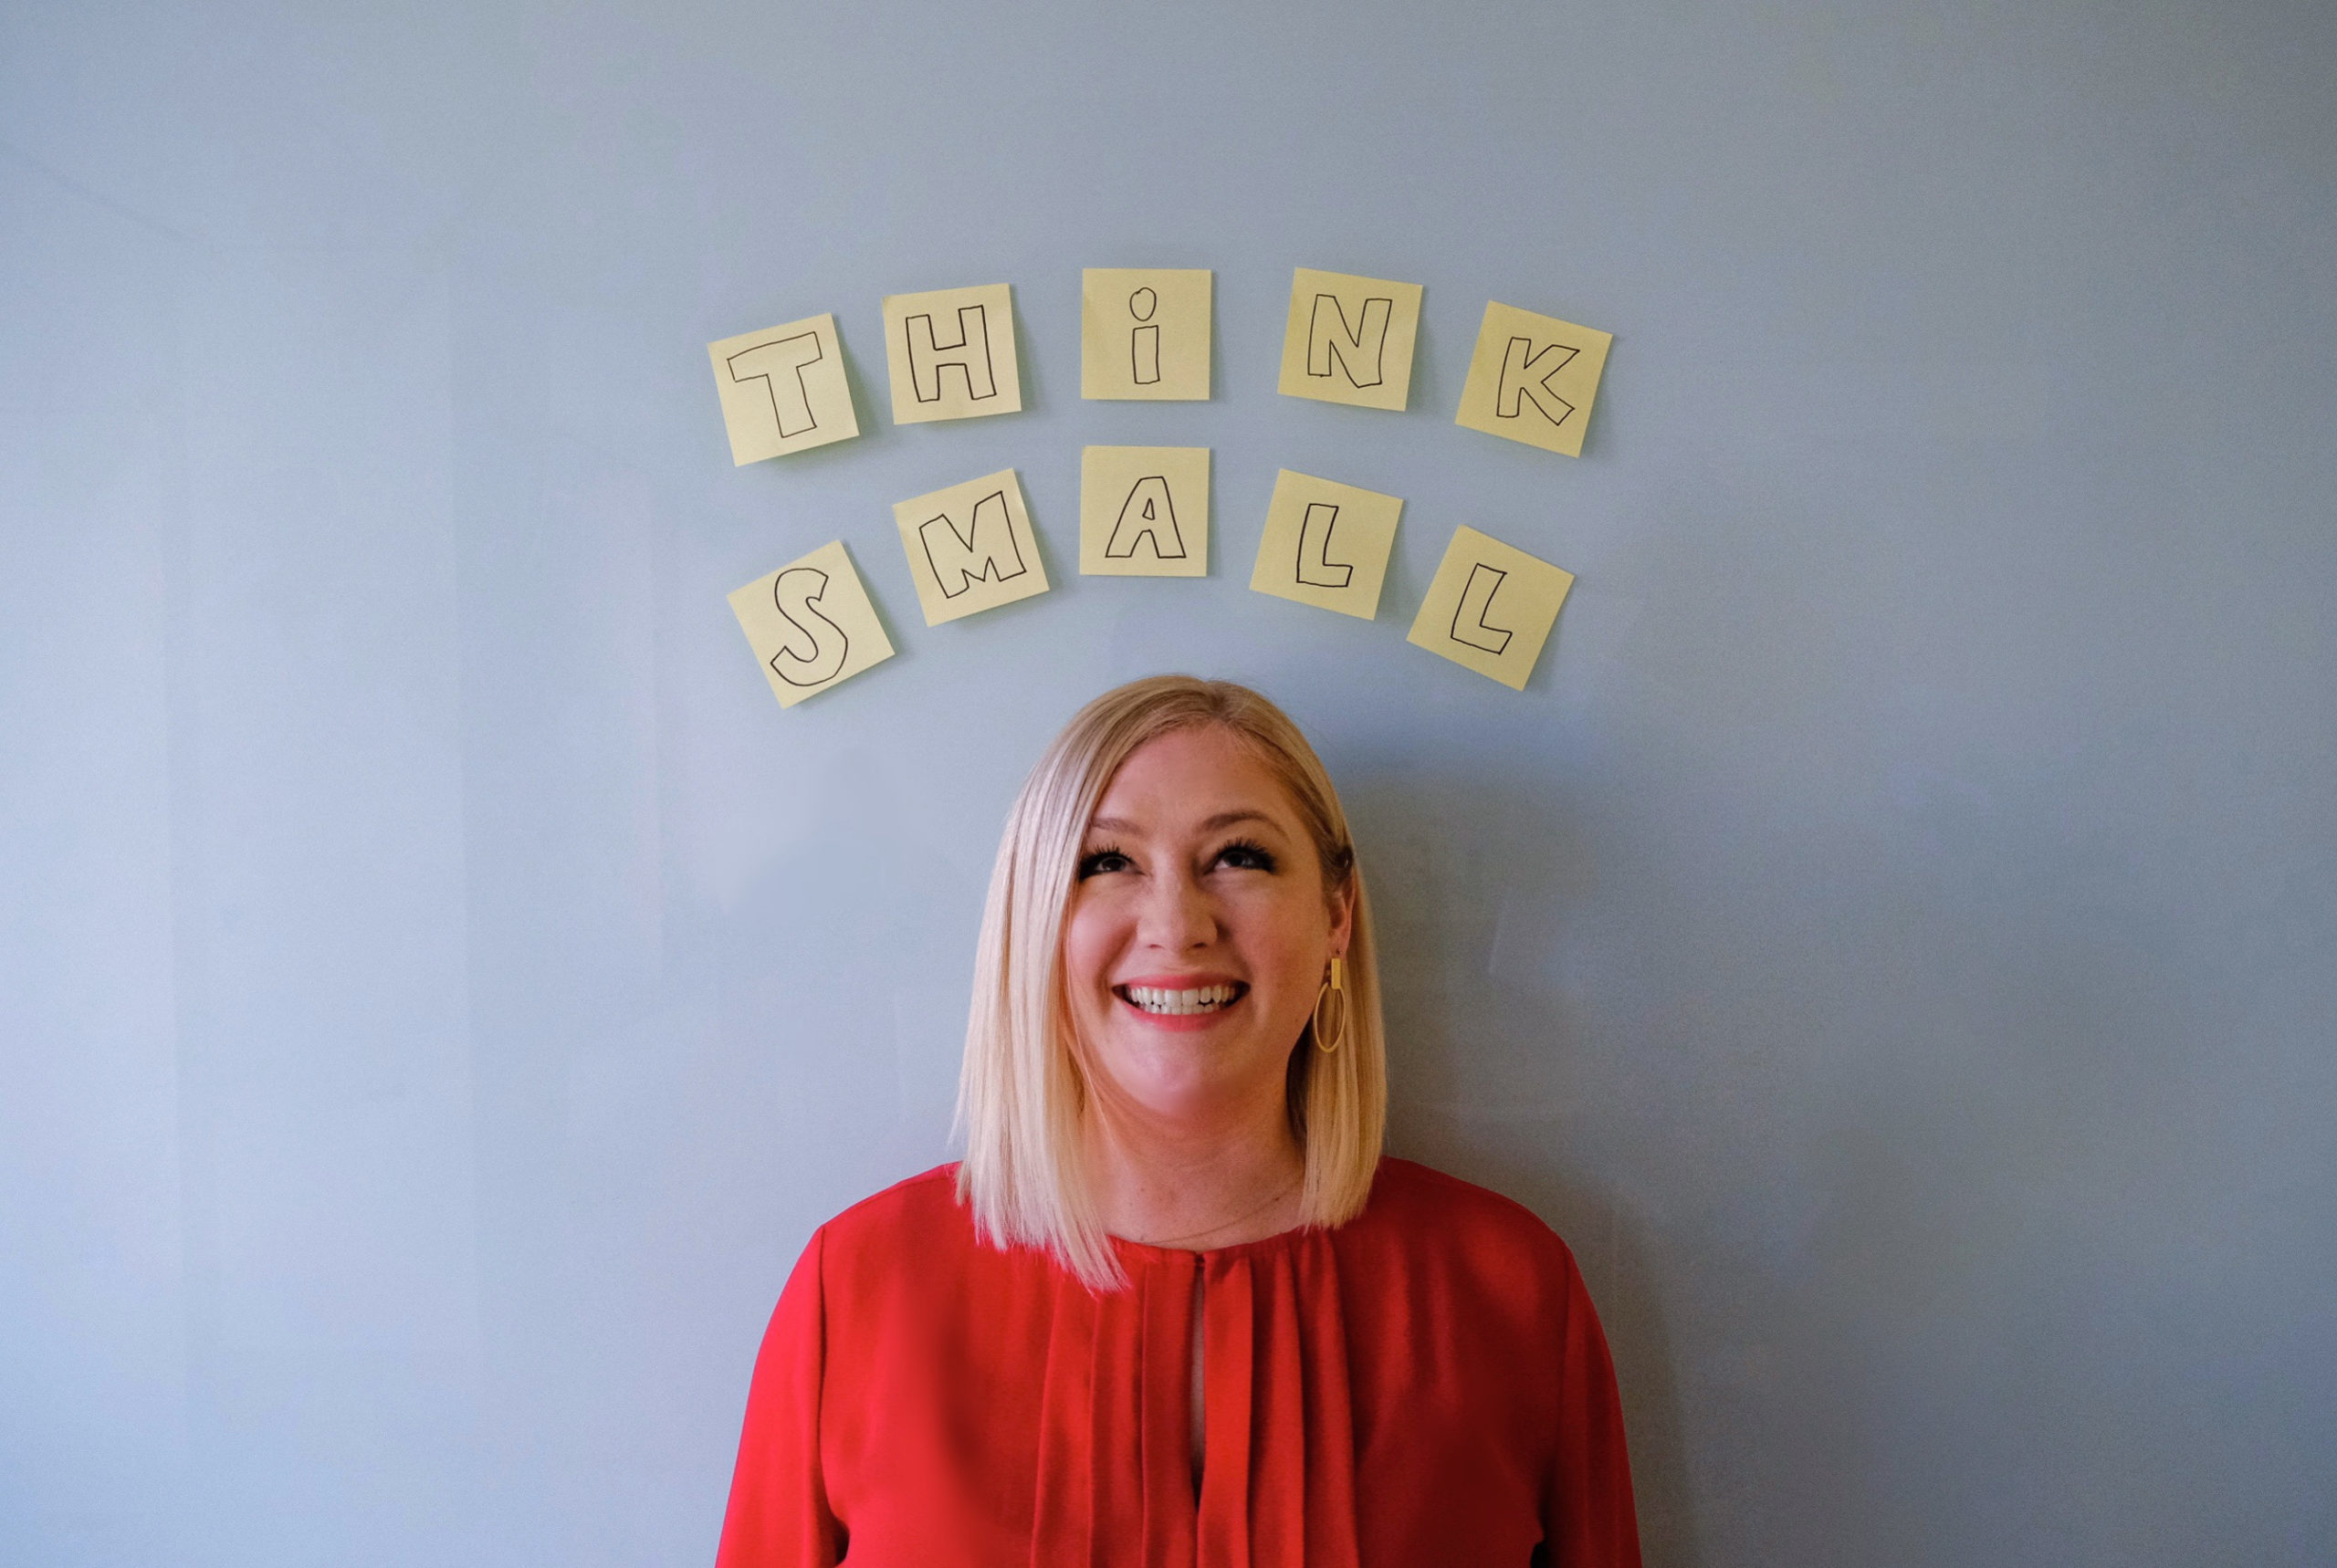 A Caucasian female in a red blouse looking at sticky notes that read, "Think Small" above her head that are attached to a wall